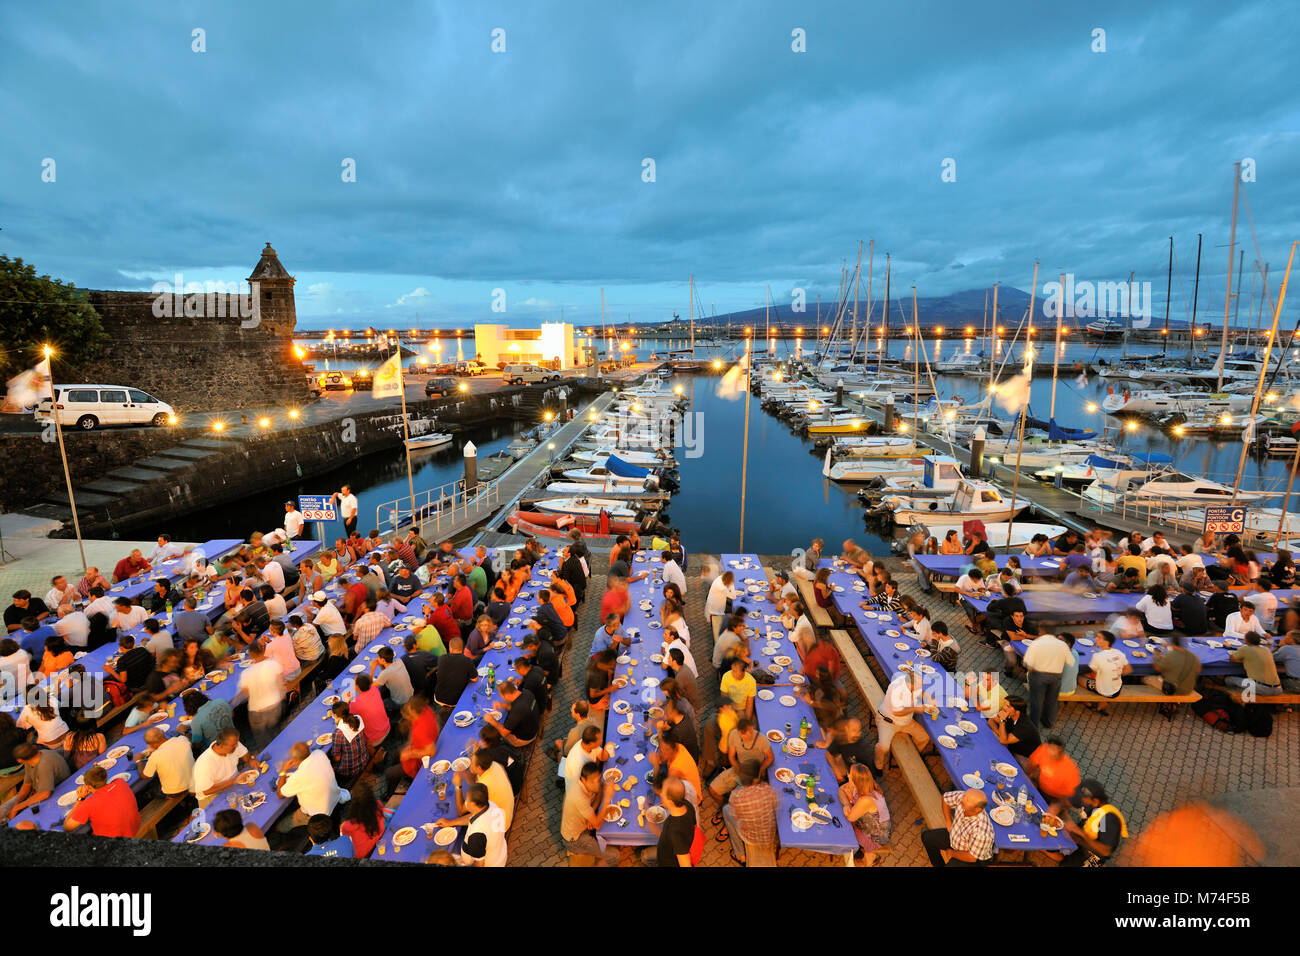 Dinner with all the sailors of the regattas during the Sea Week festival, at the Marina and Clube Naval da Horta. Faial, Azores islands, Portugal Stock Photo